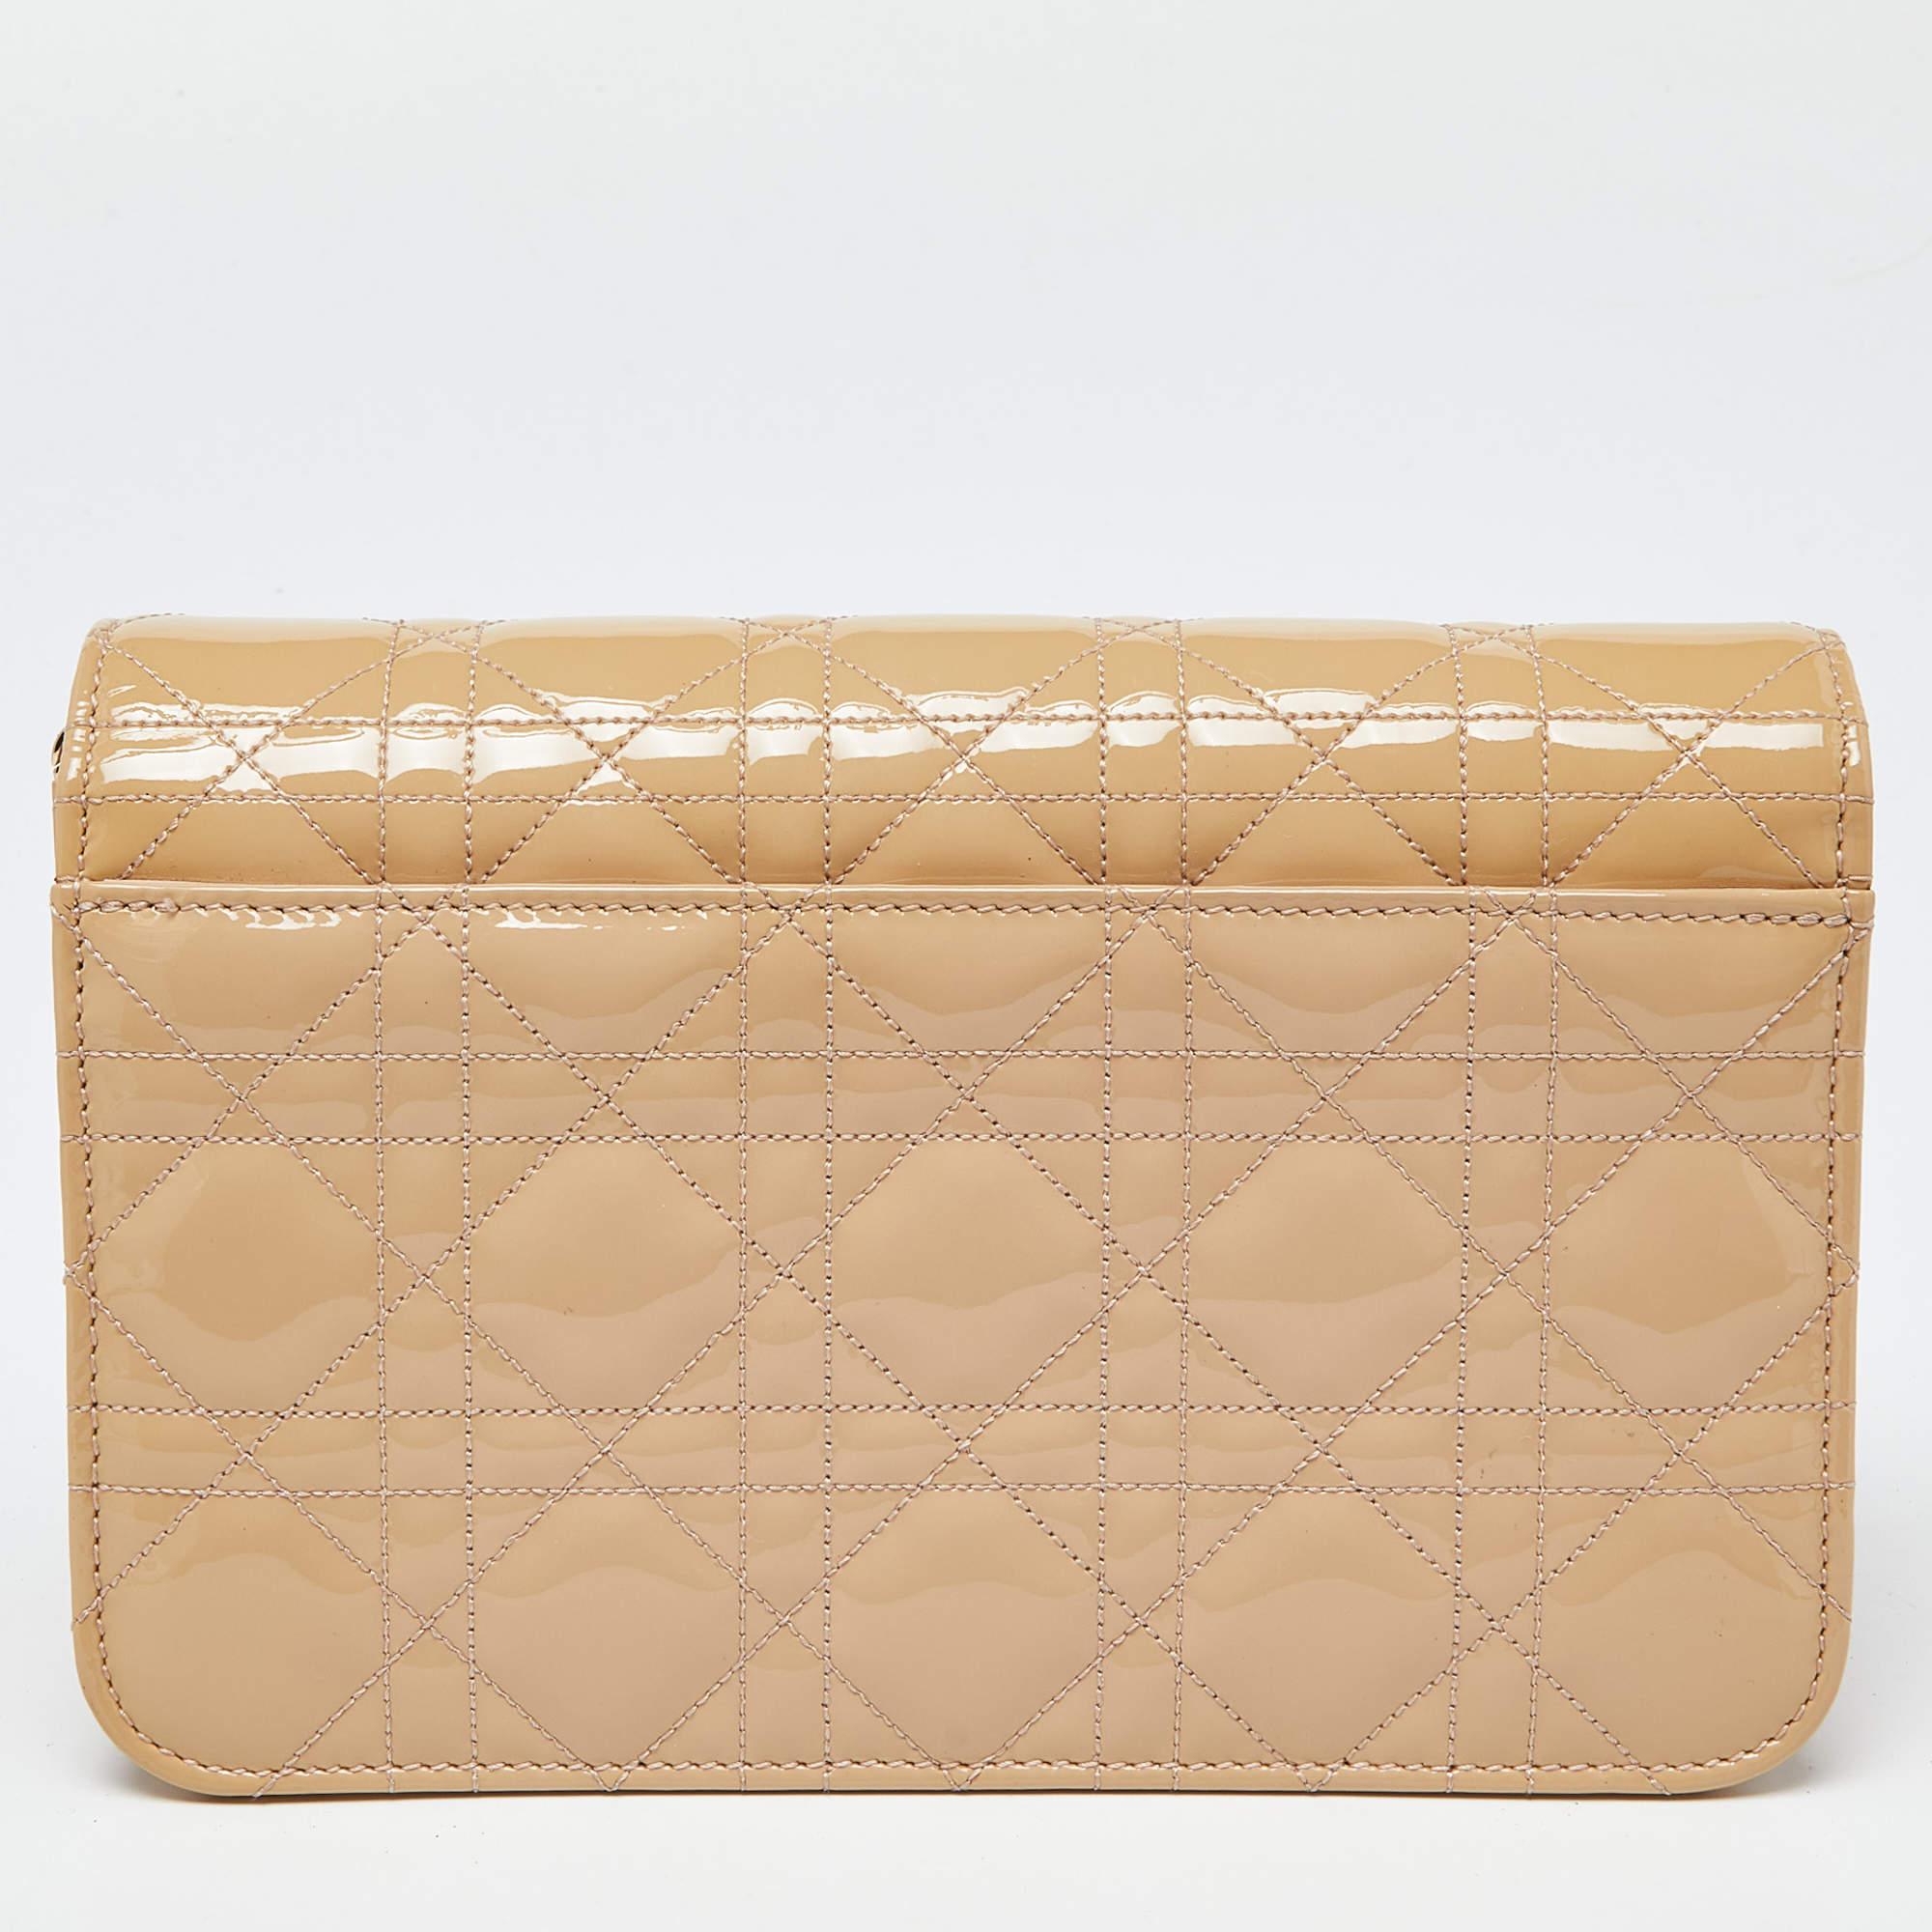 This New clutch was named after 'New Look' which was actually coined by Christian Dior himself. Dazzling in a nude shade, the bag is crafted from patent leather in their Cannage pattern and designed with a front lock. The leather and fabric-lined